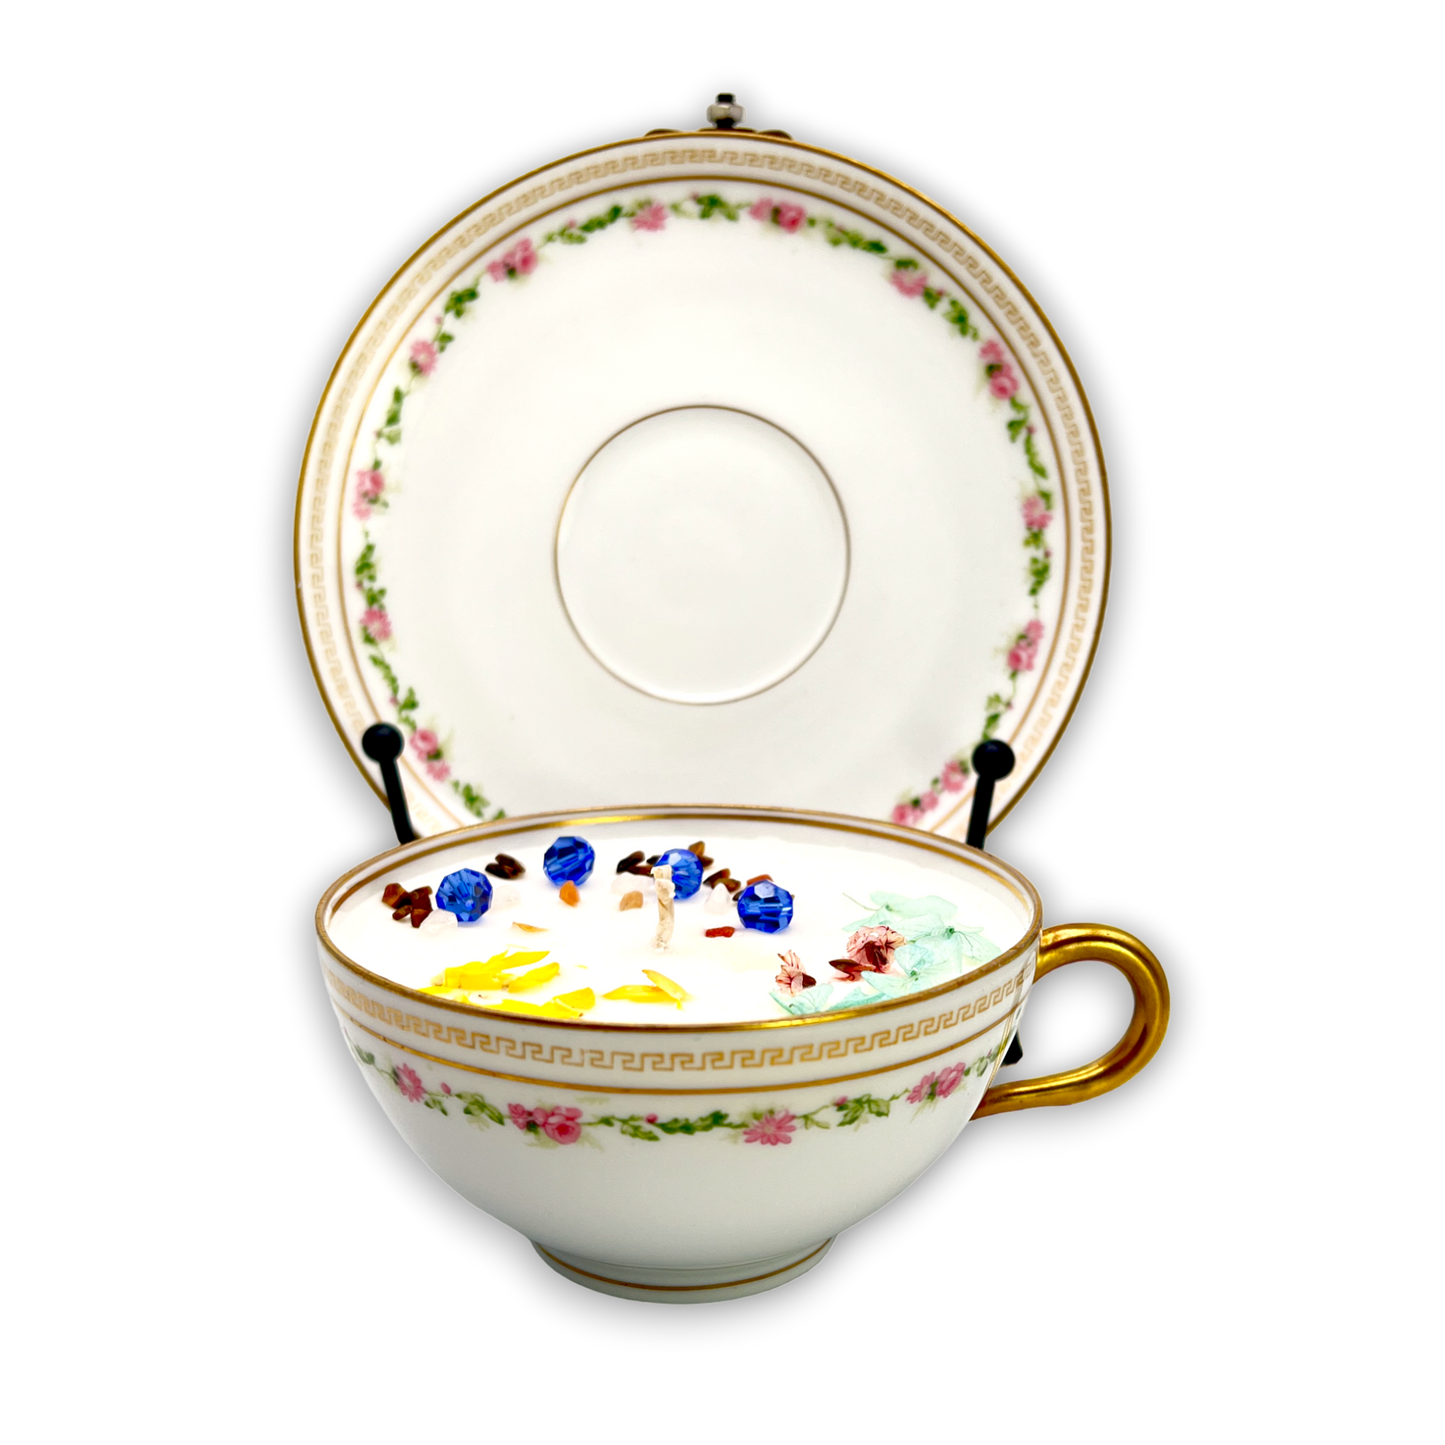 French Limoges Vintage Teacup Candle